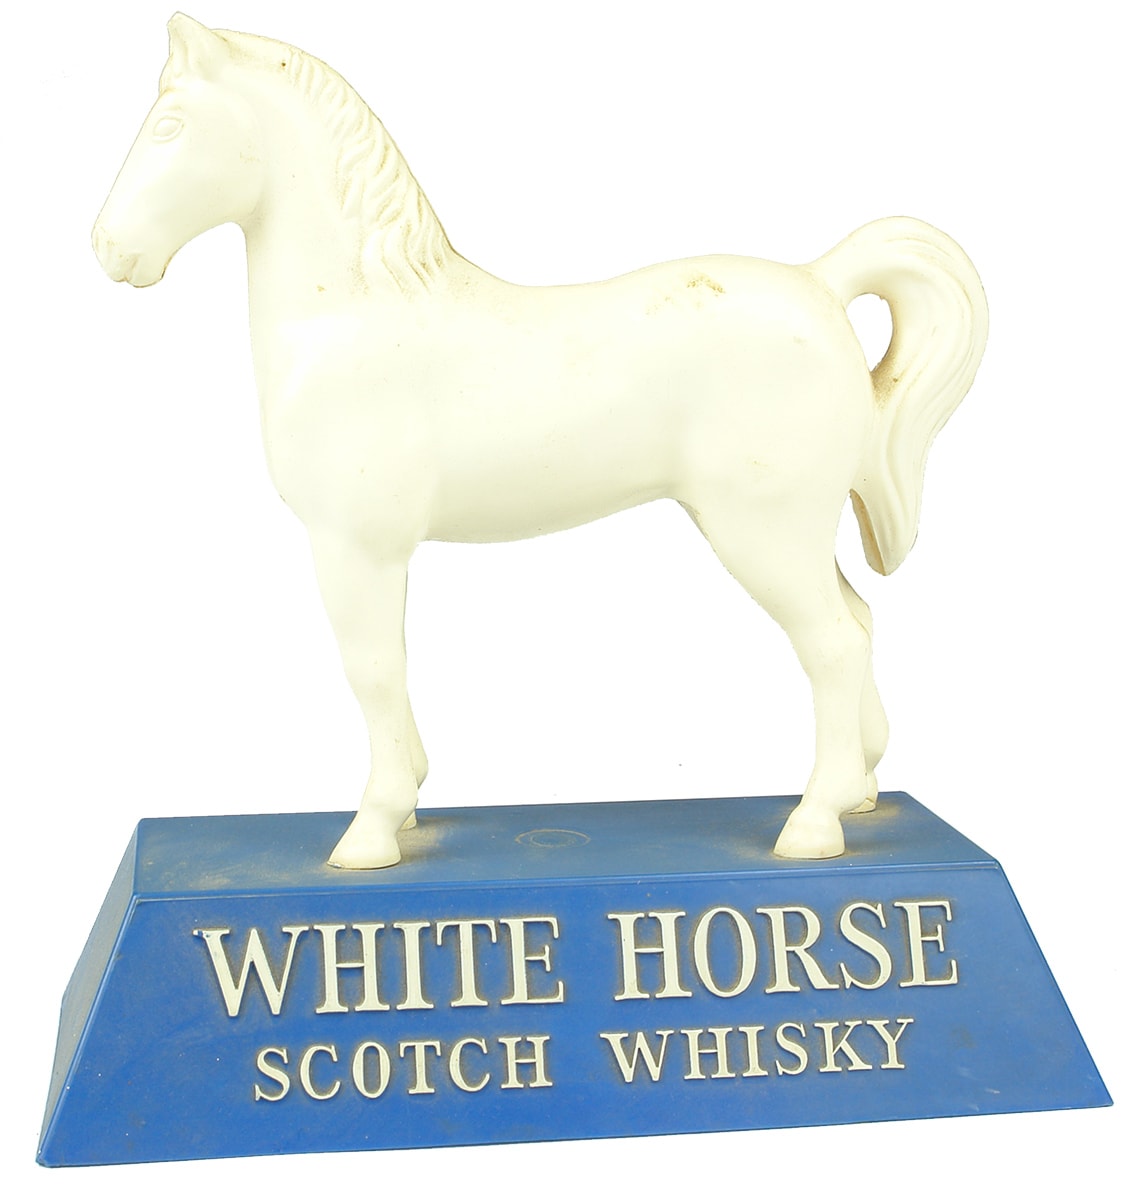 White Horse Scotch Whisky Statue - ABCR Auctions